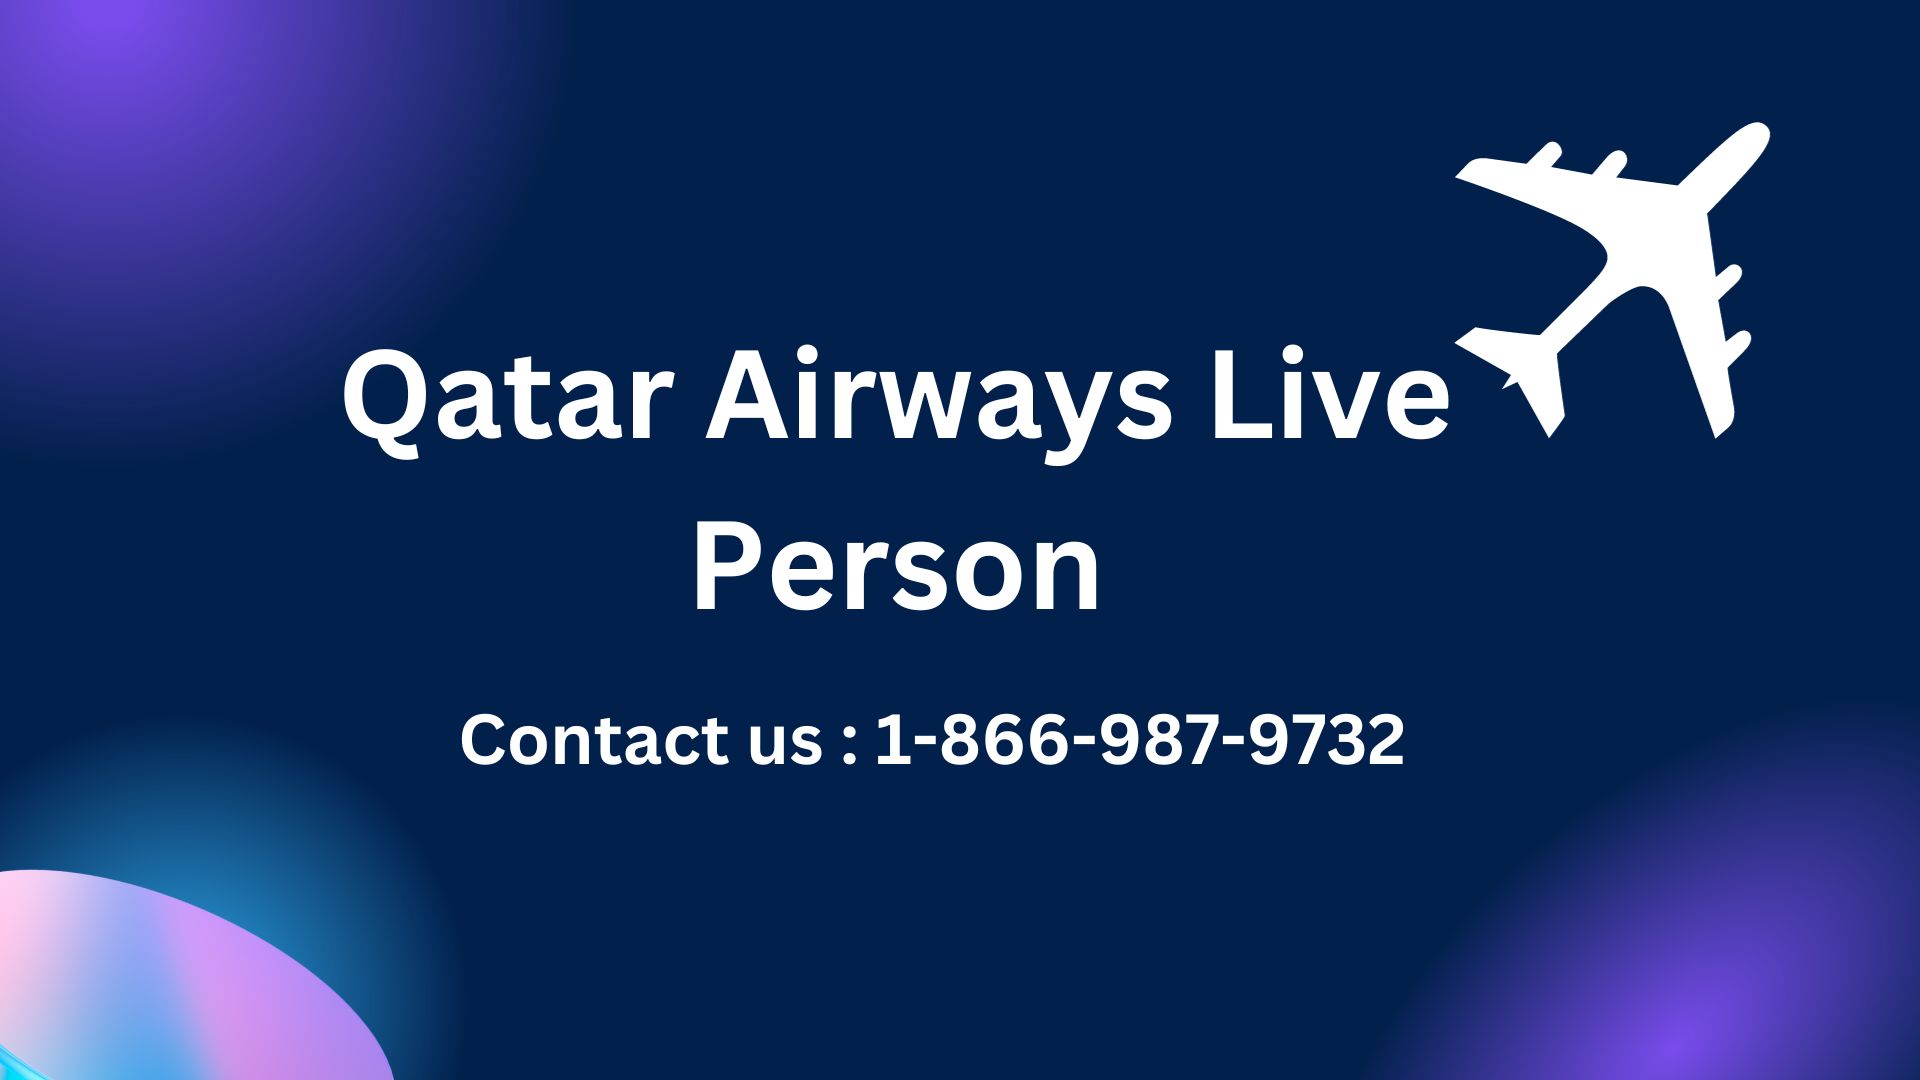 How can I speak with a live person at Qatar Airways?